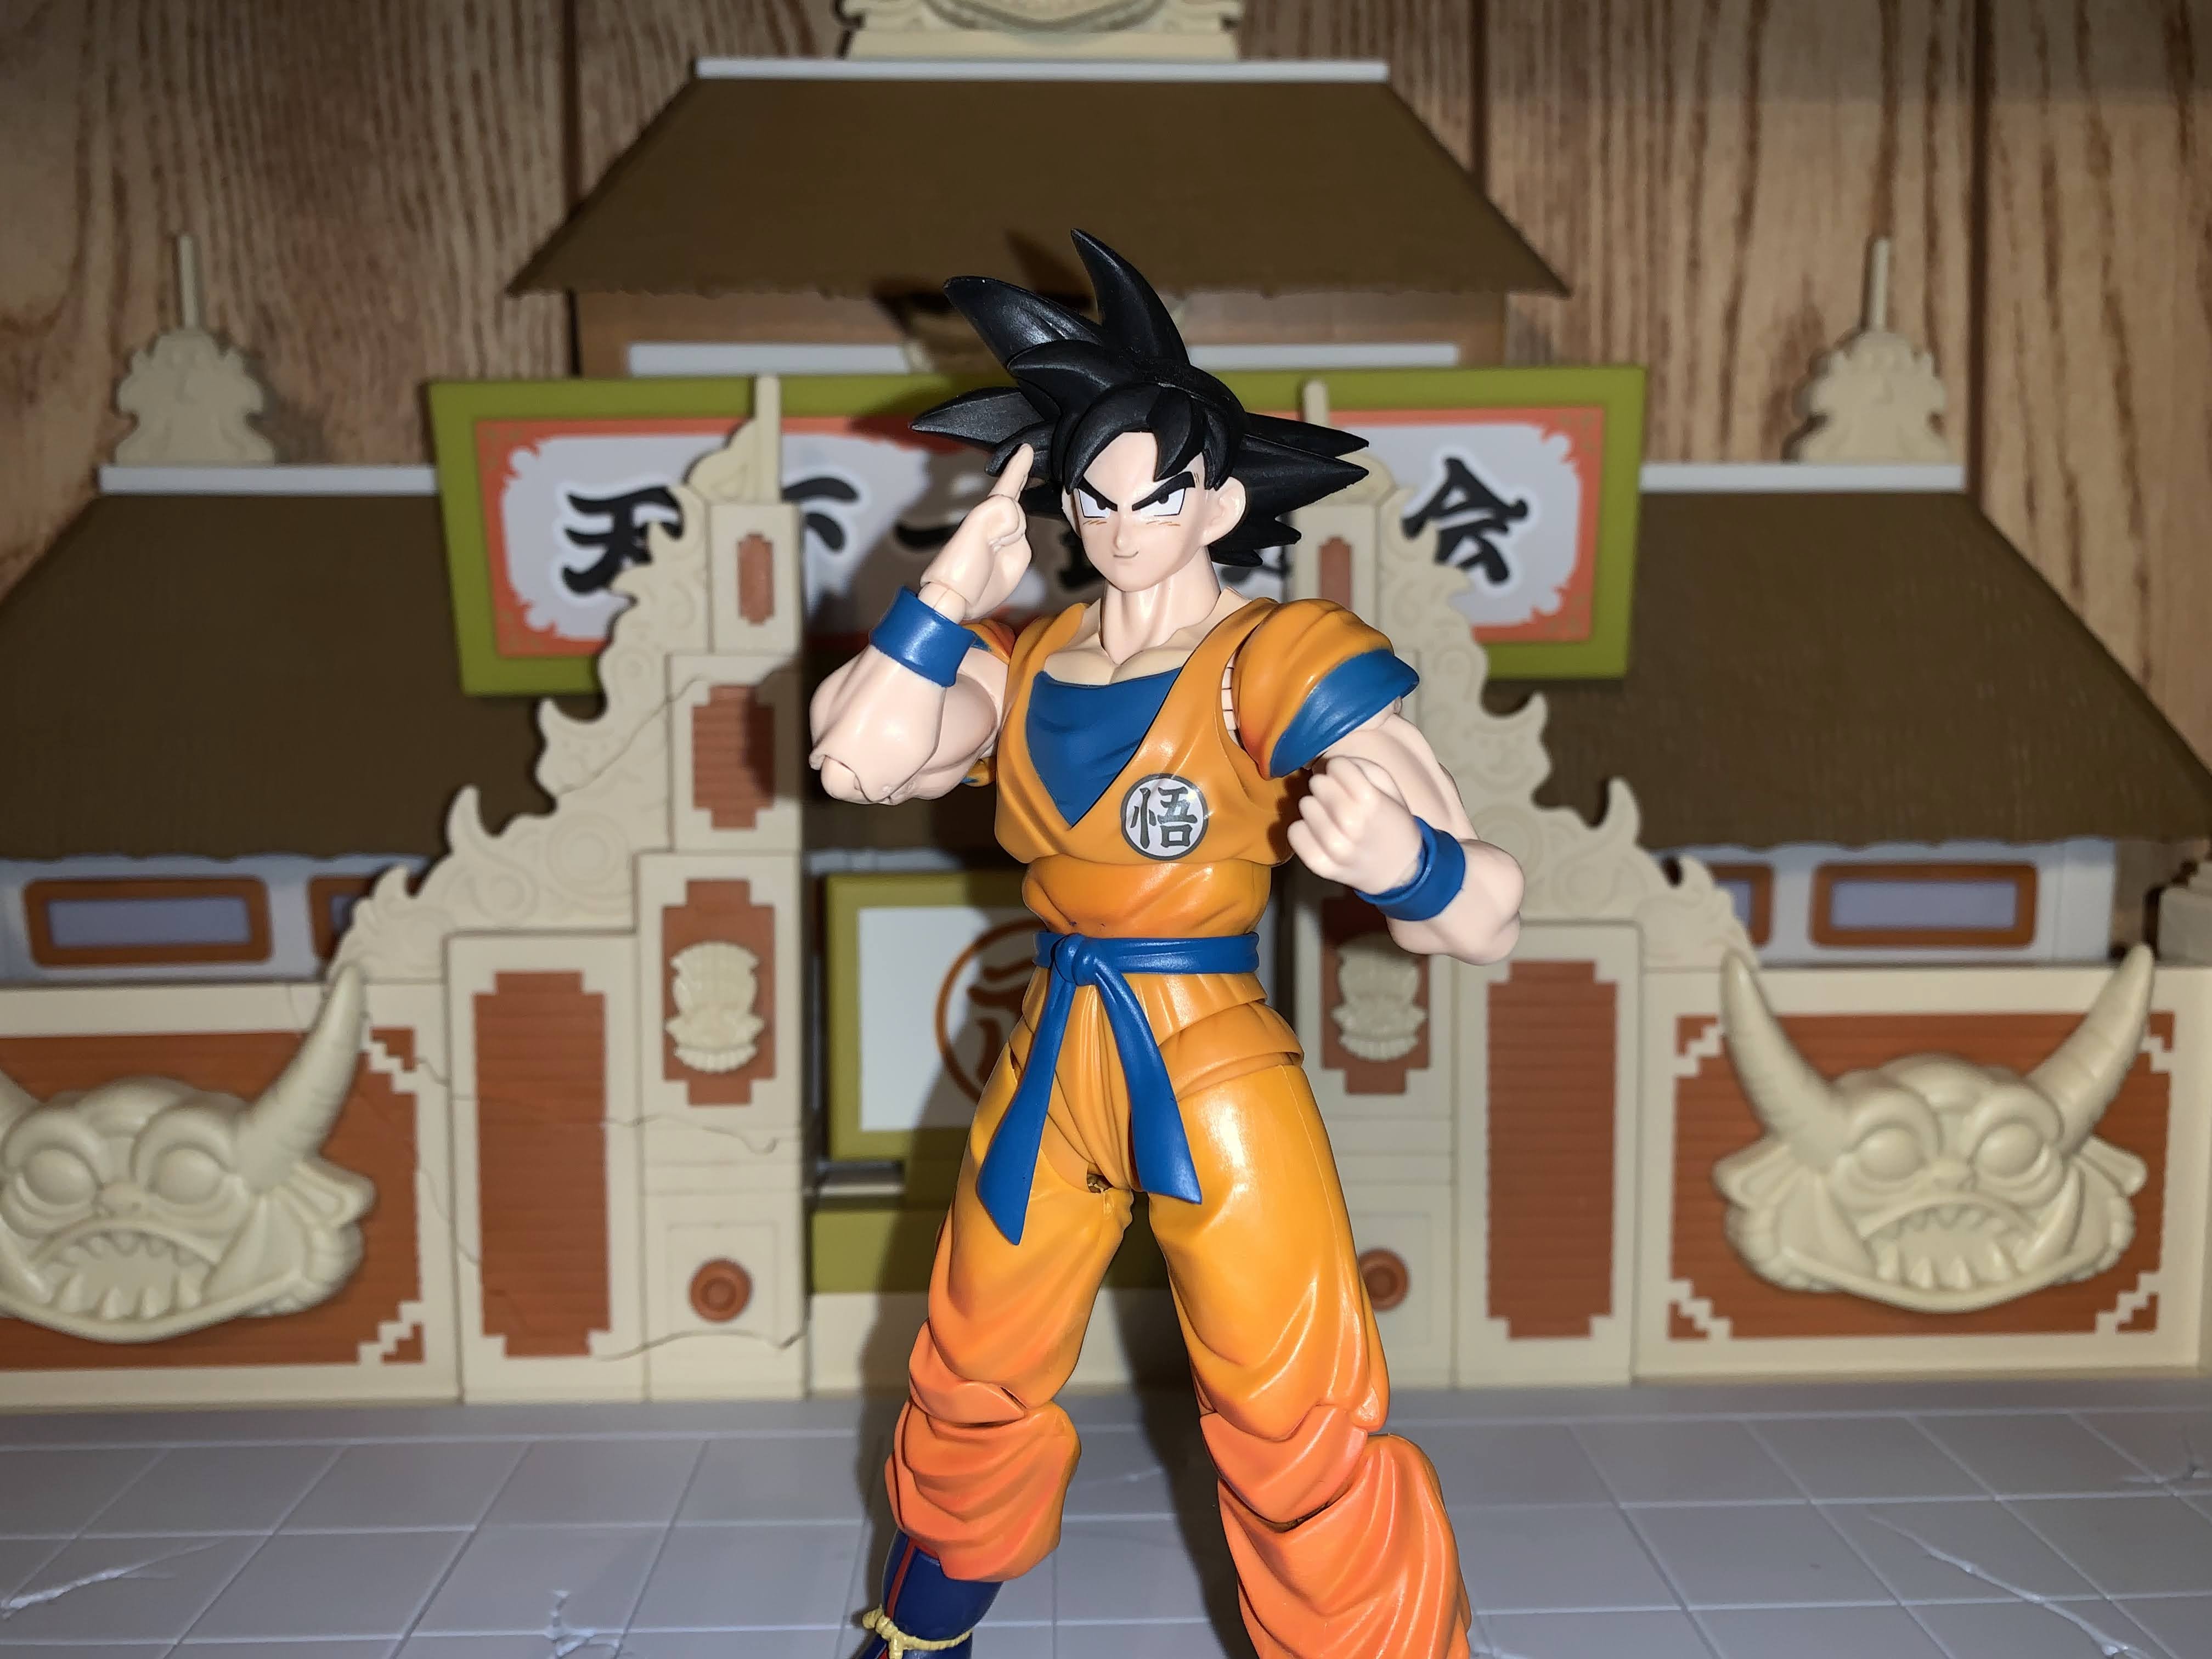 They're finally here and they're beautiful! Demoniacal Fit Goku